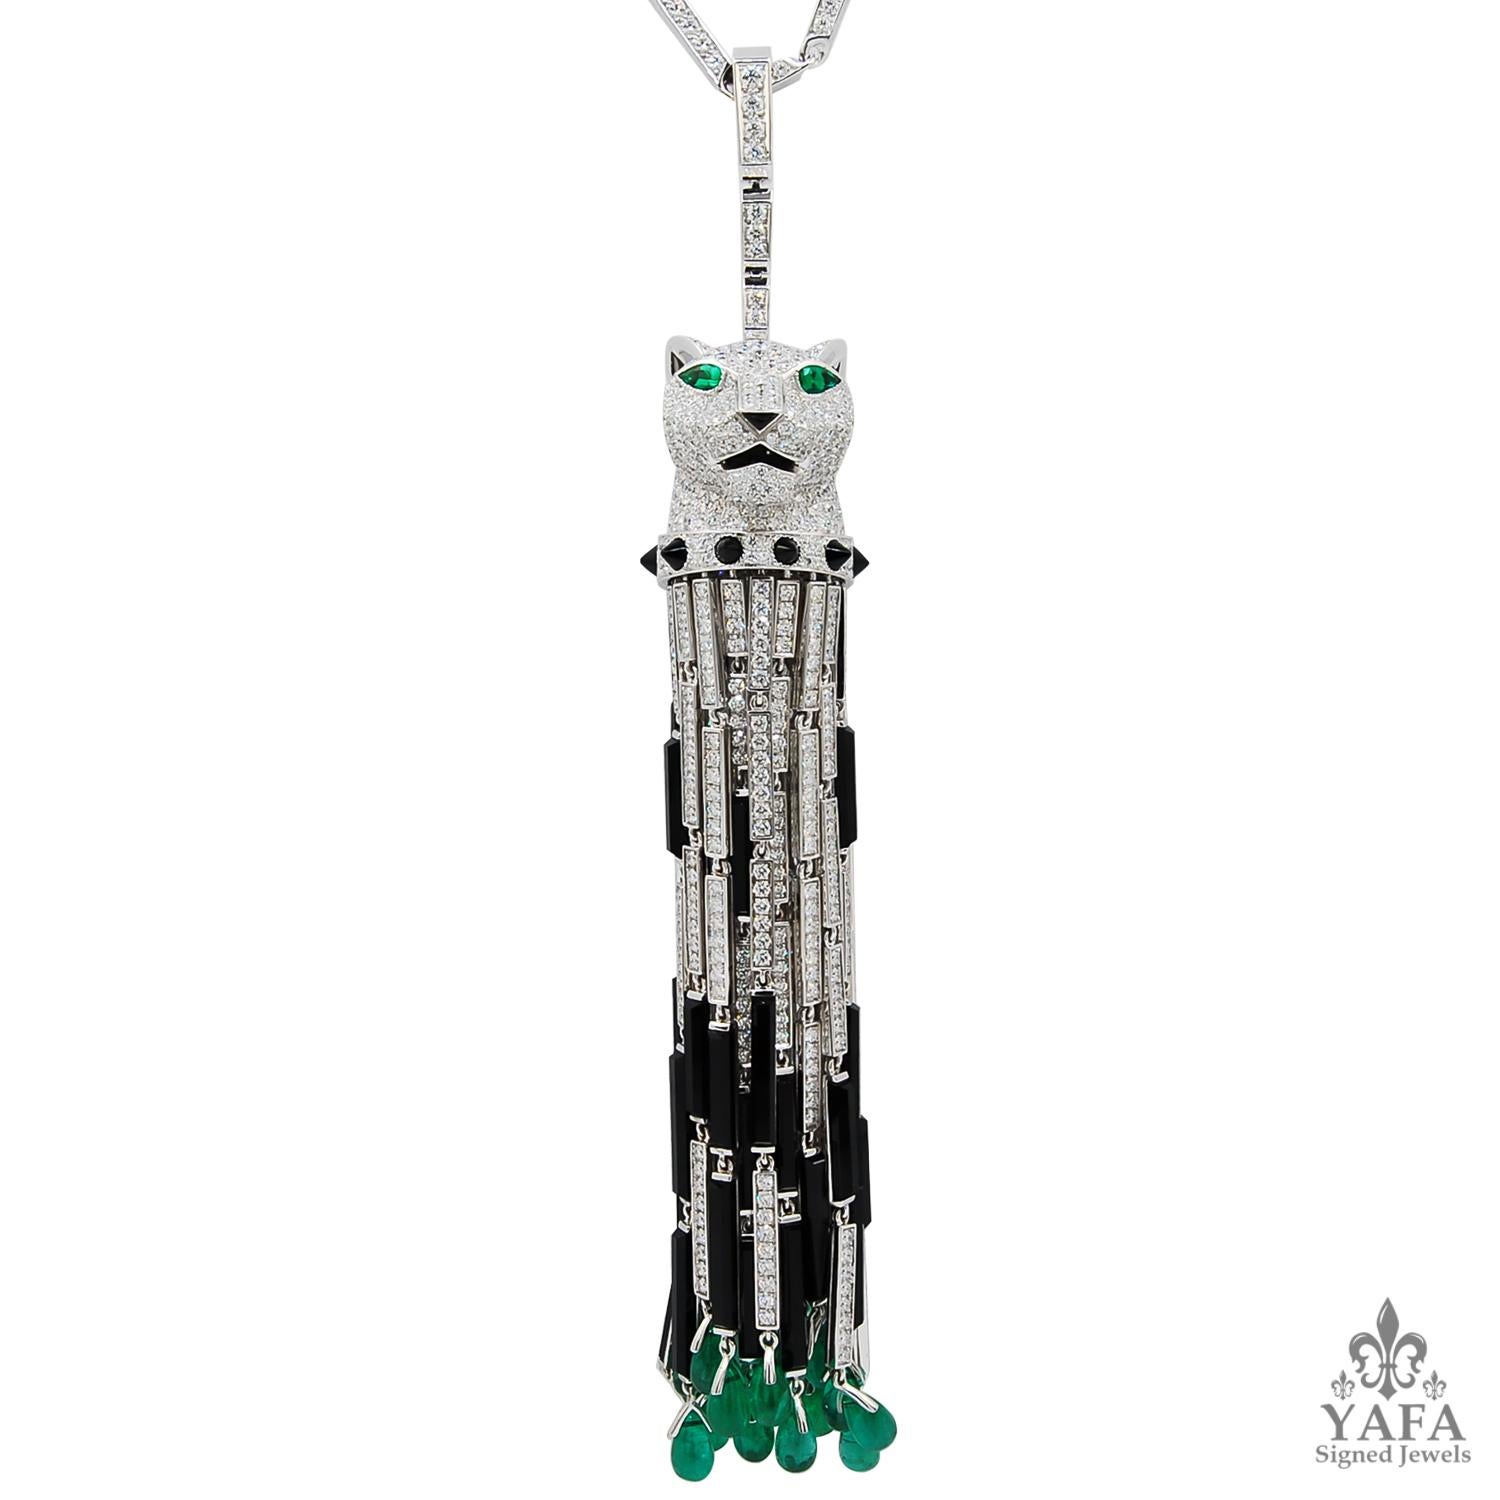 CARTIER Diamond, Onyx, Emerald Panther Tassel Necklace
A 18k white gold panther tassel necklace, set with round brilliant-cut diamonds, emerald and onyx, signed Cartier, French.
dimensions approx. 30.5″ in length and pendant 5.5″ in length
Signed